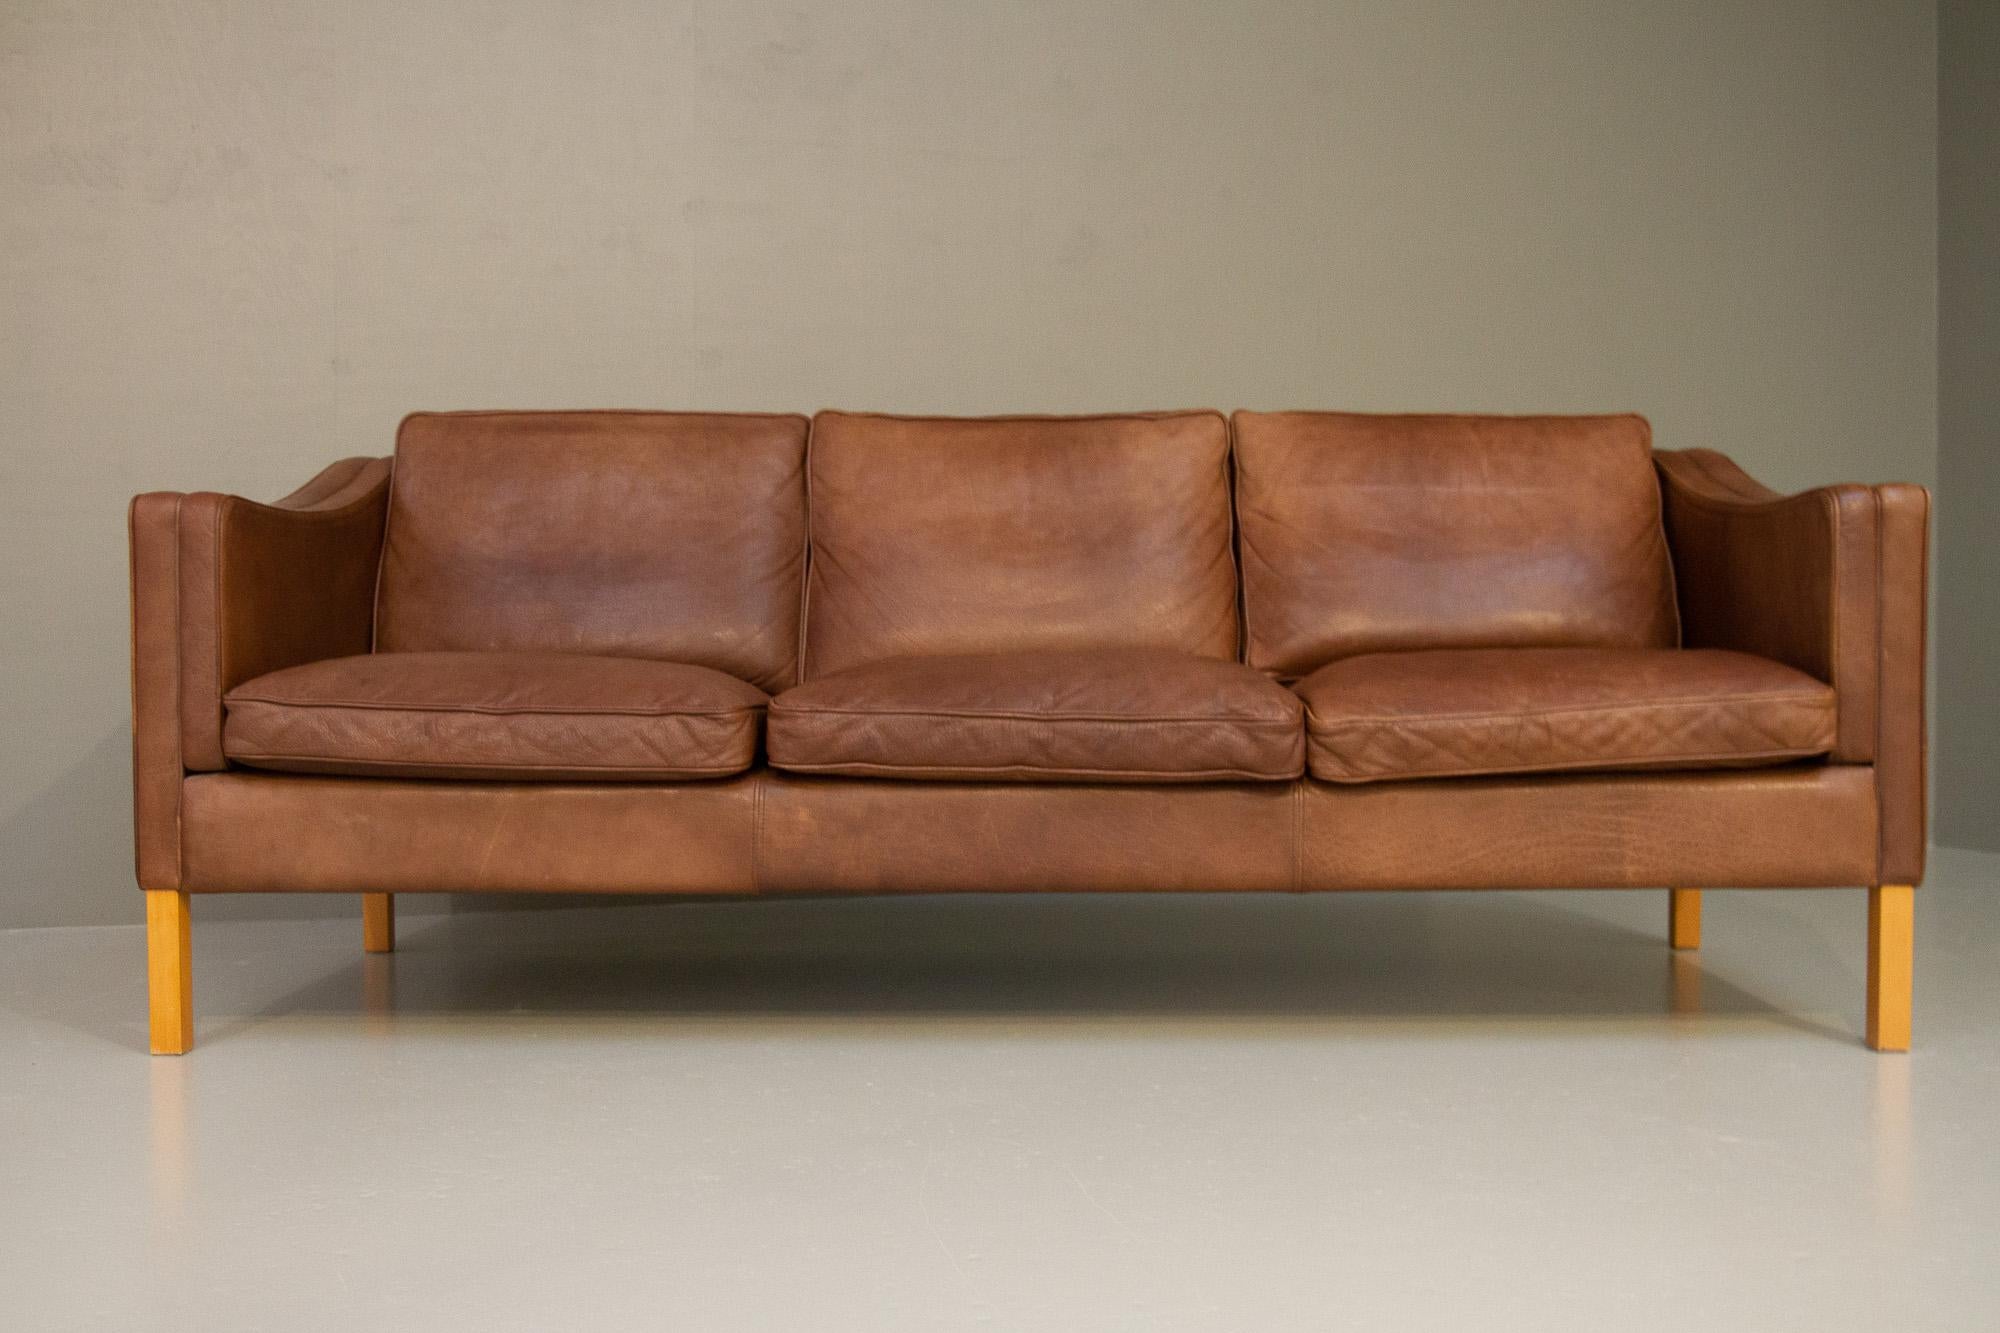 Late 20th Century Vintage Danish Leather 3-Seater Sofa by Stouby, 1980s.